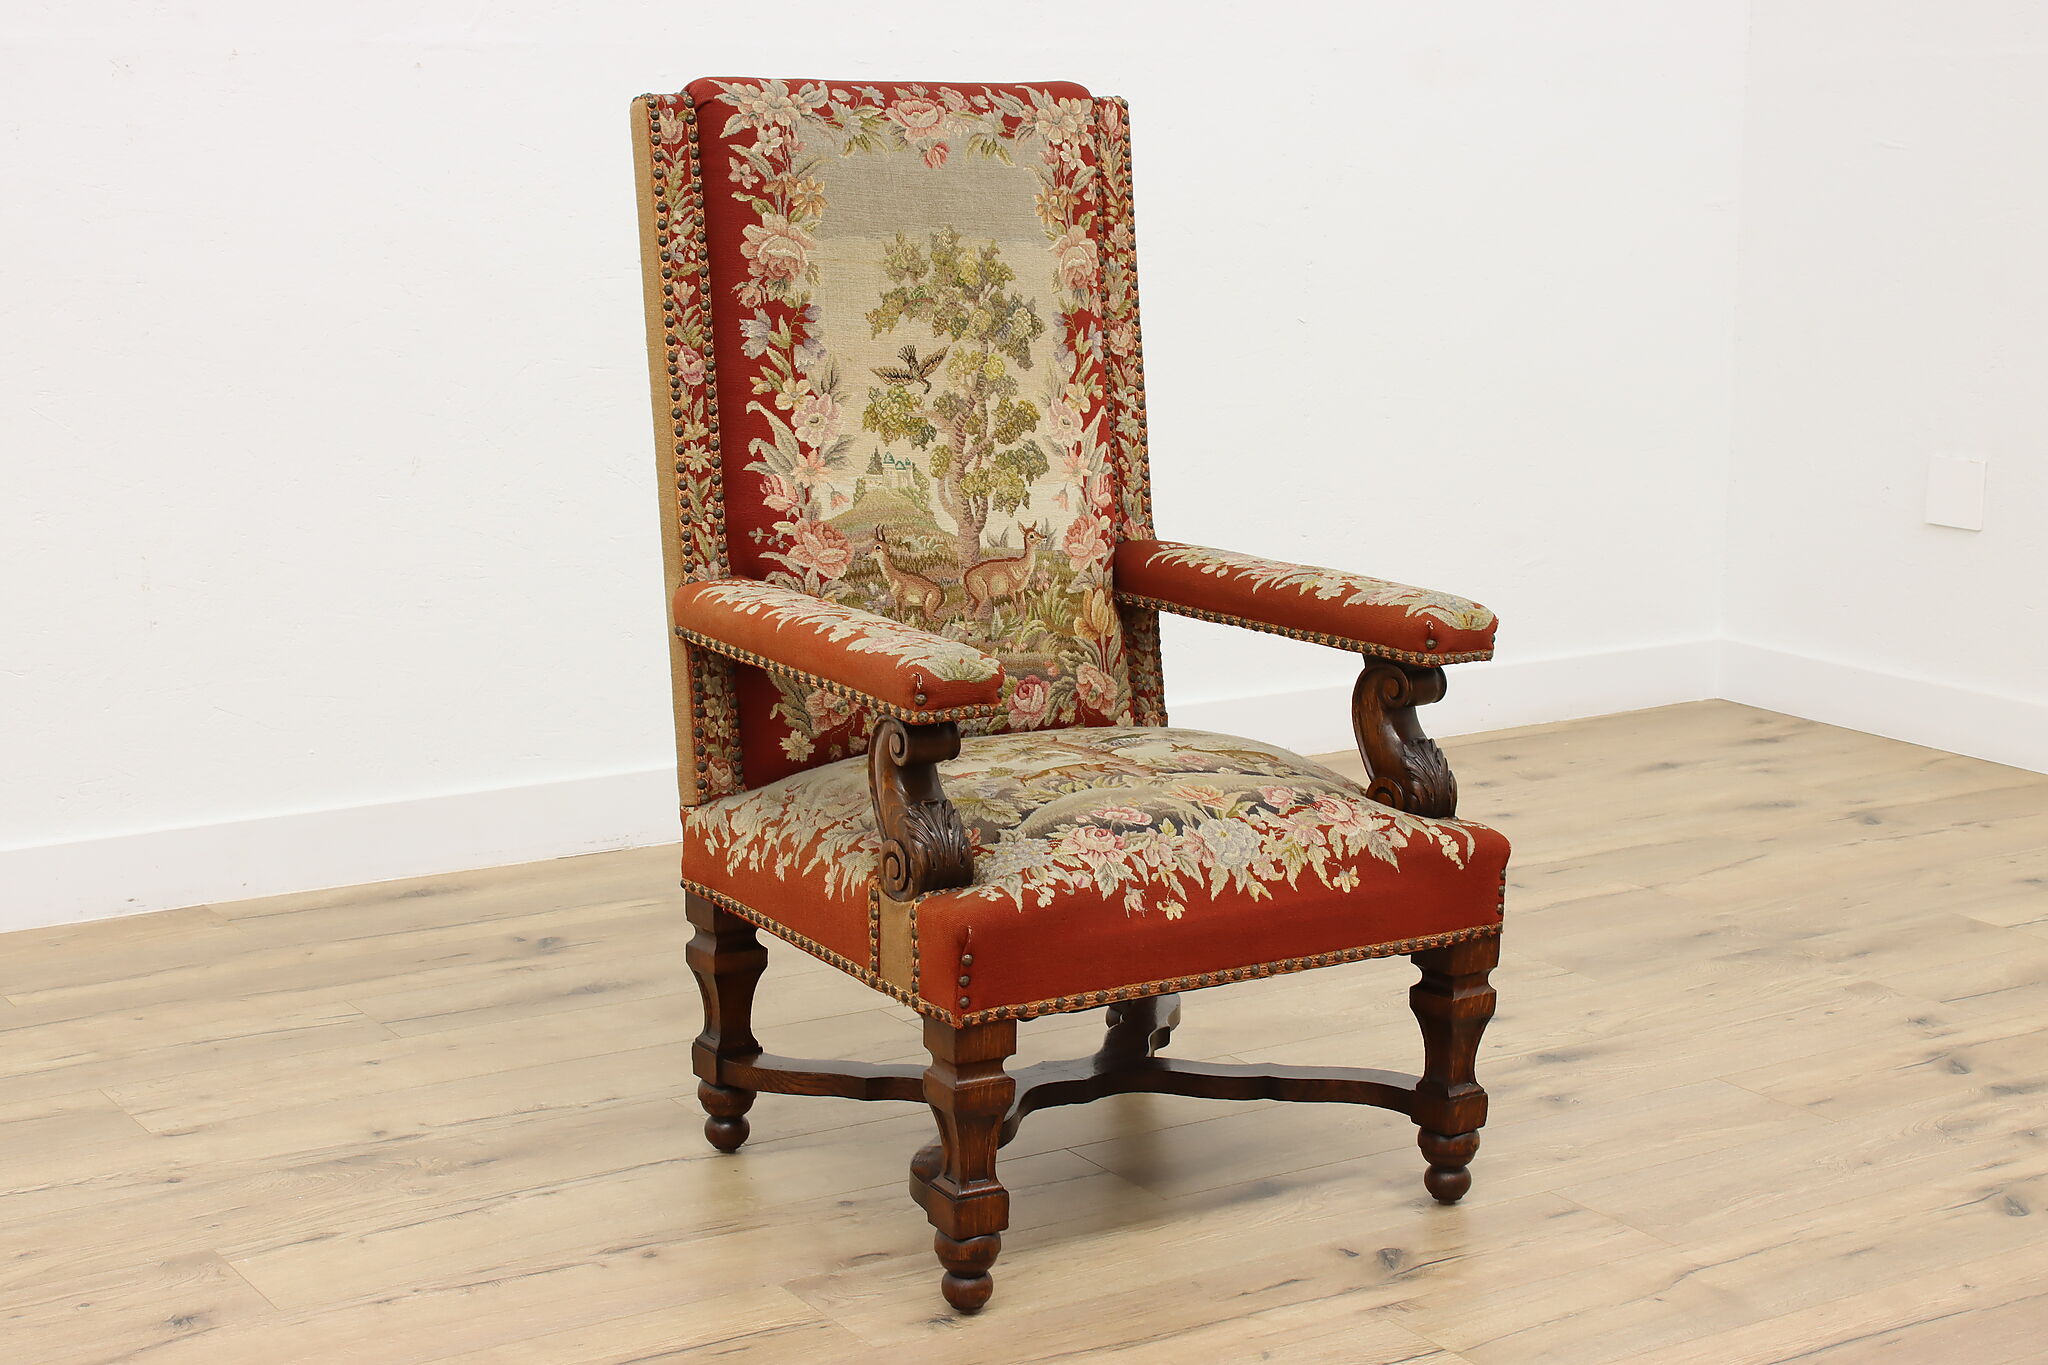 Country French Antique Chair, Handstitched Needlepoint